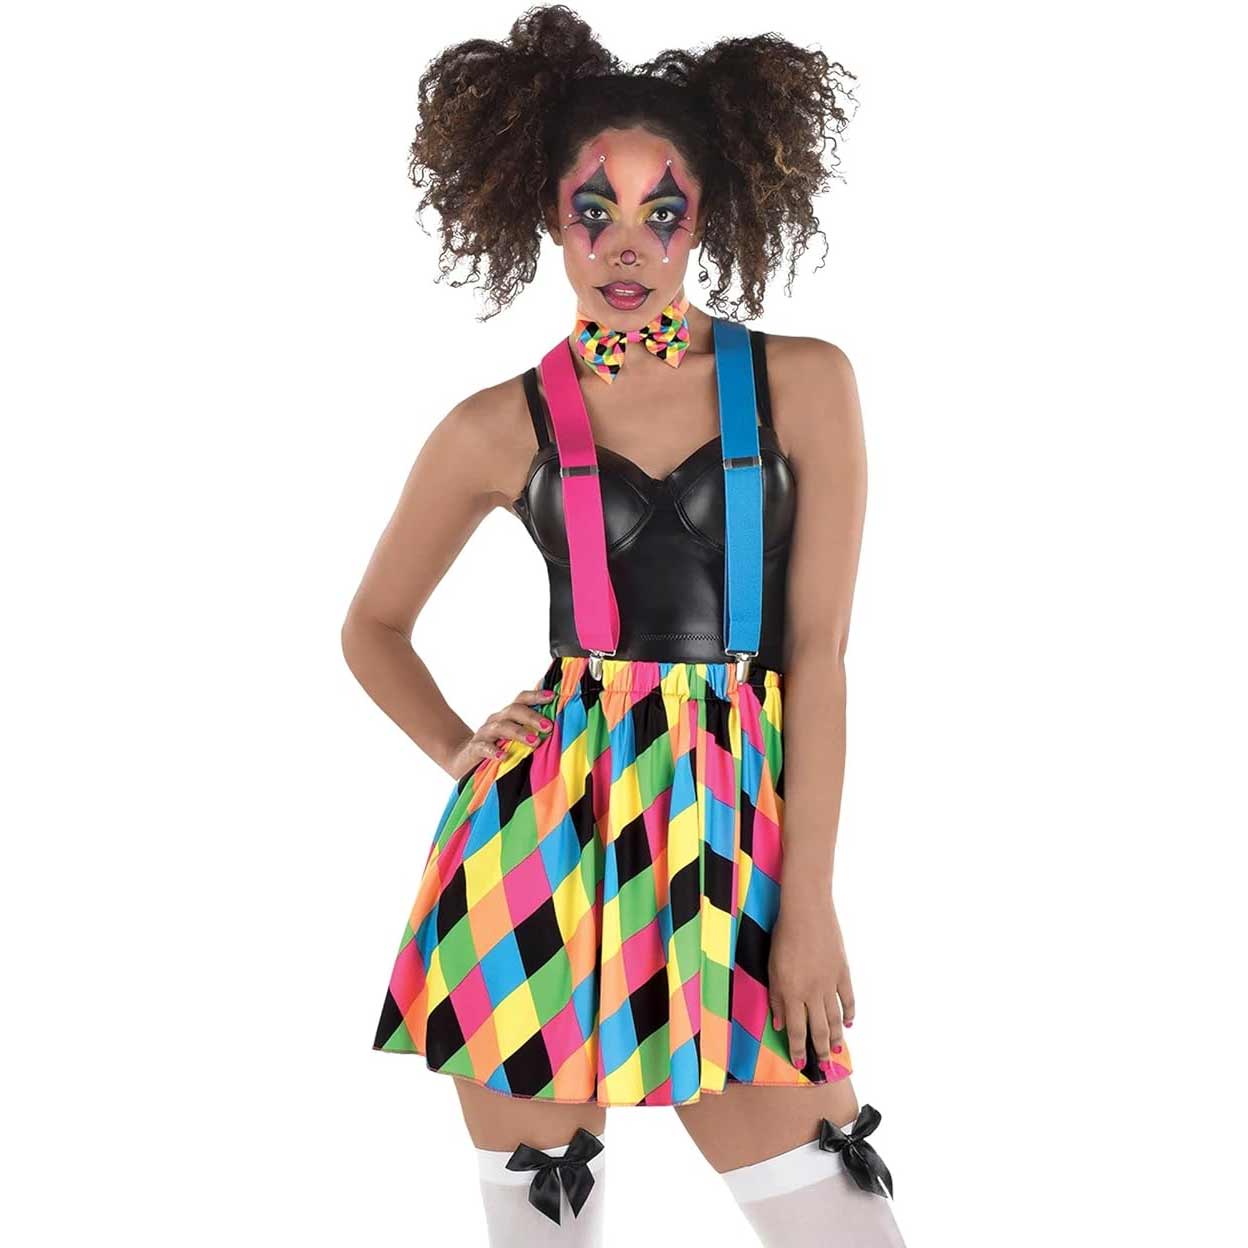 Neon Circus Skater Skirt With Suspender Set